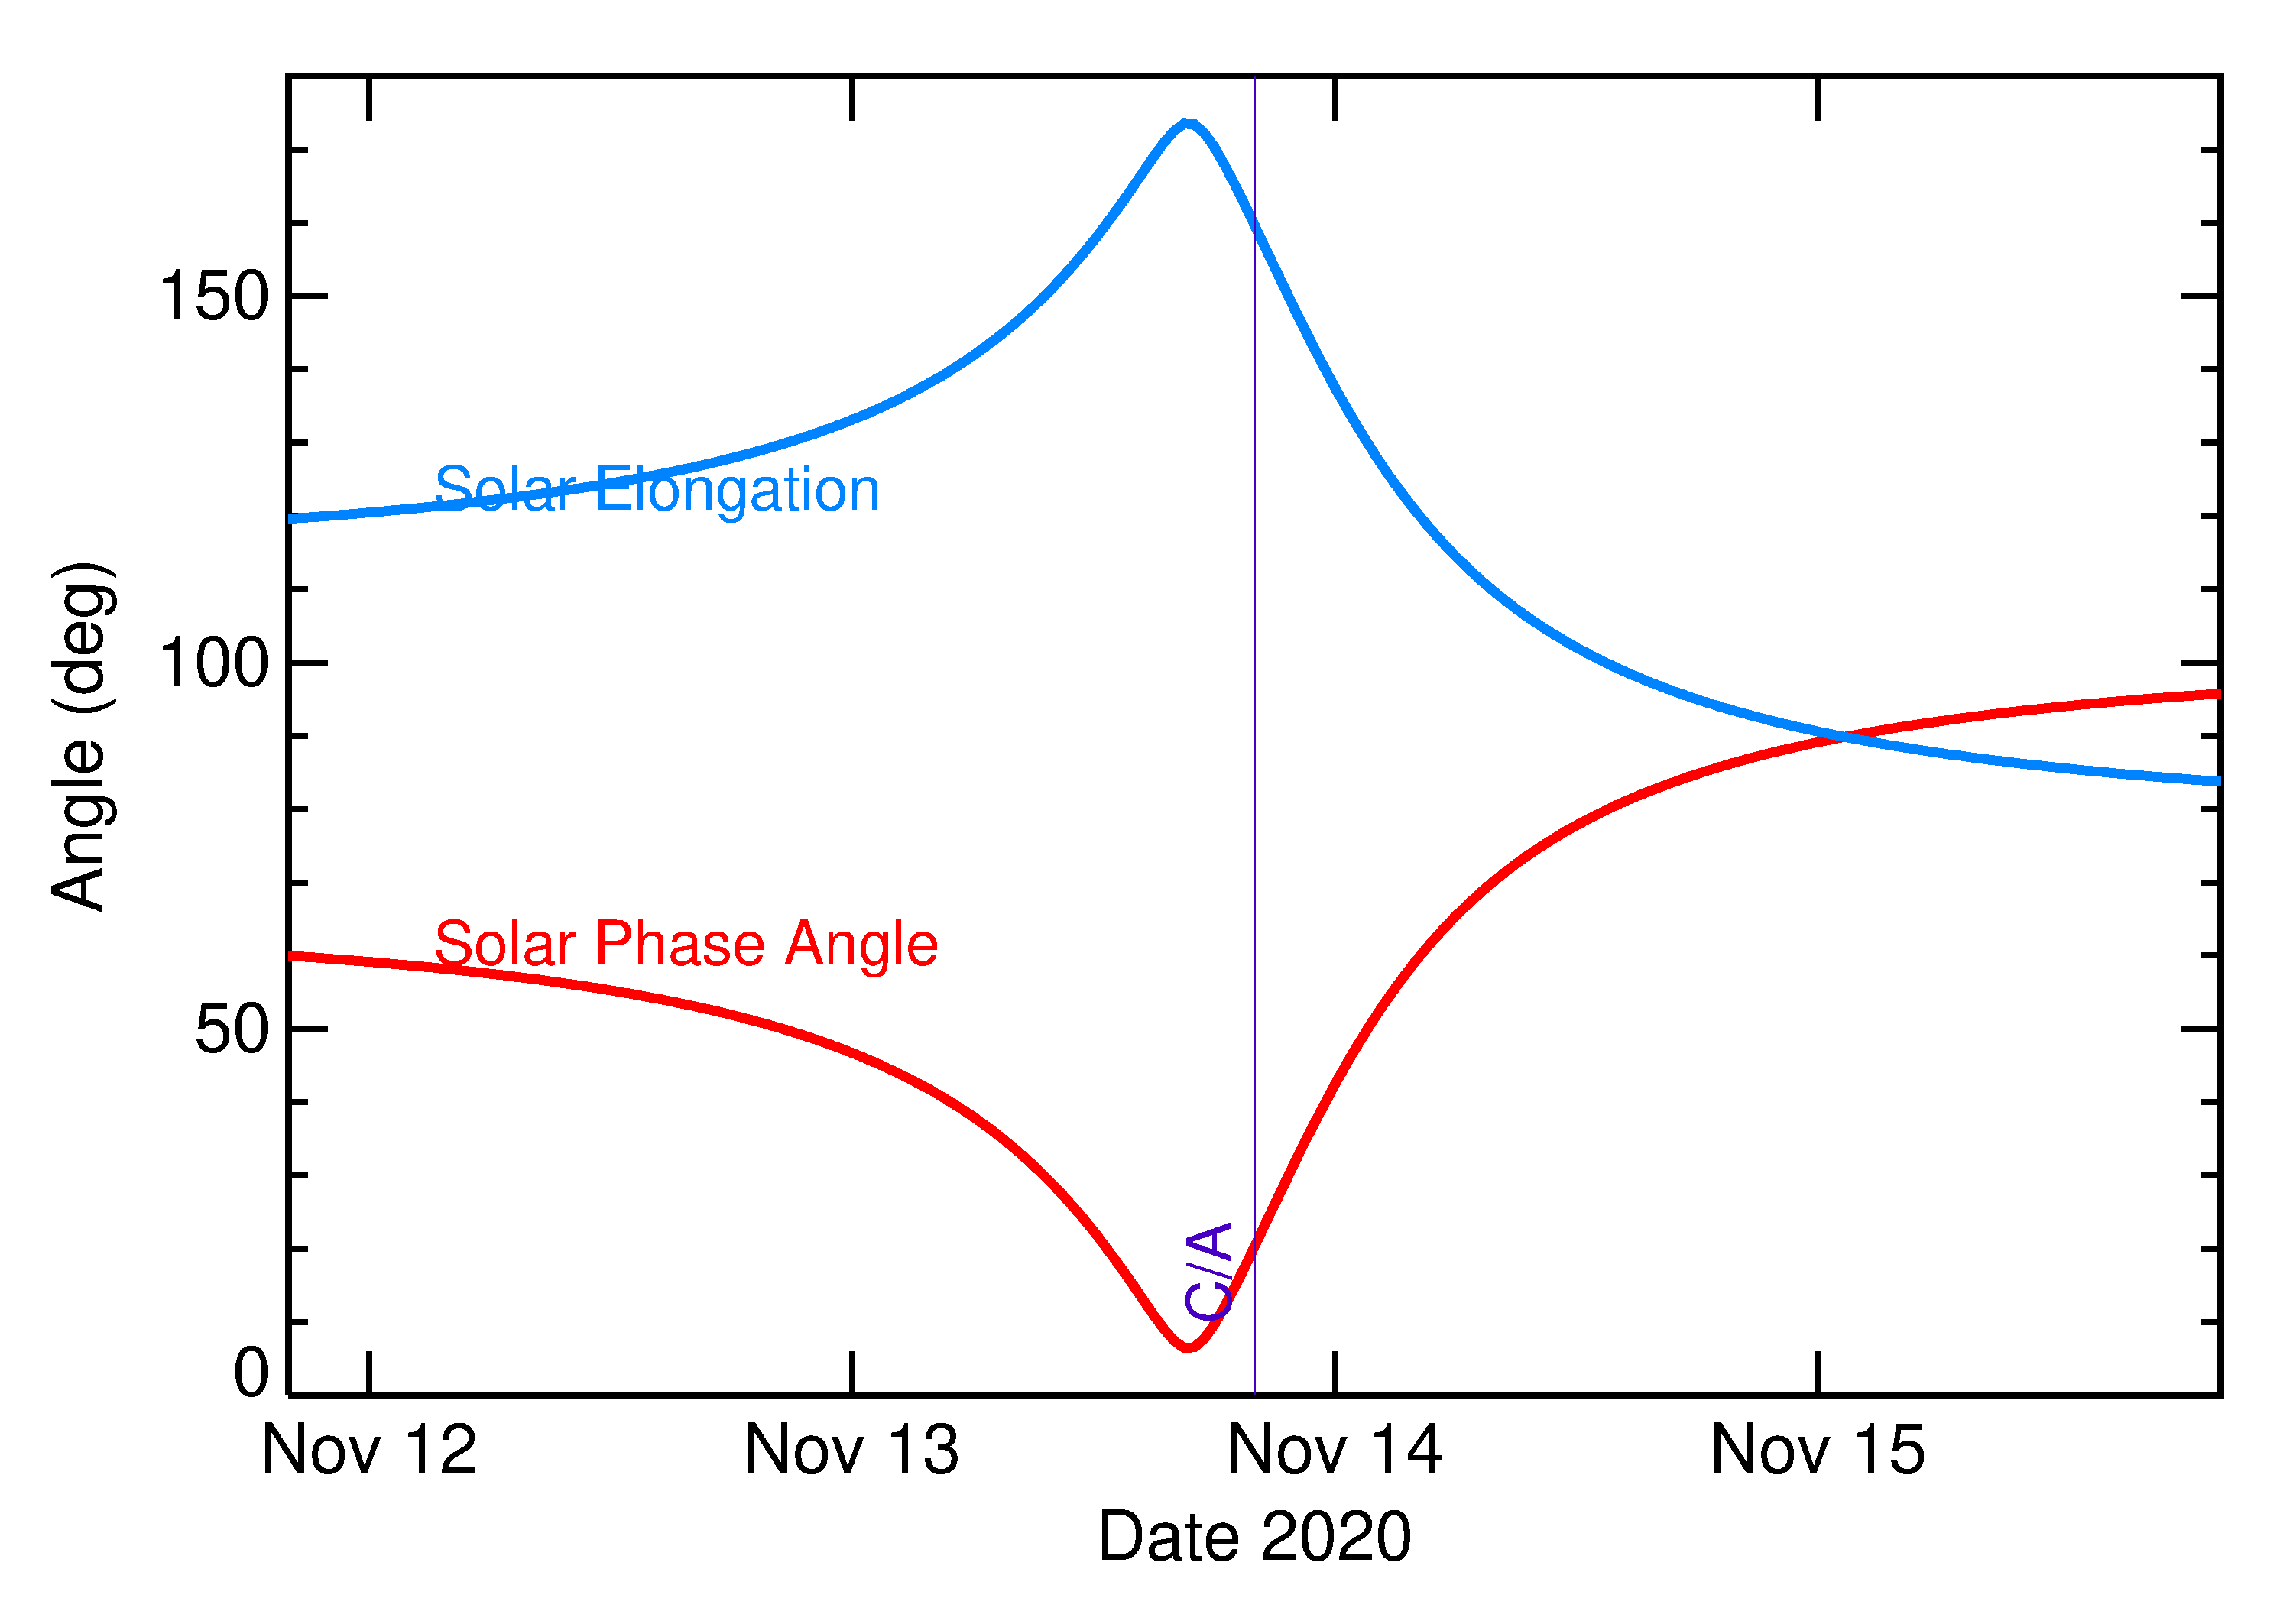 Solar Elongation and Solar Phase Angle of 2020 VH5 in the days around closest approach